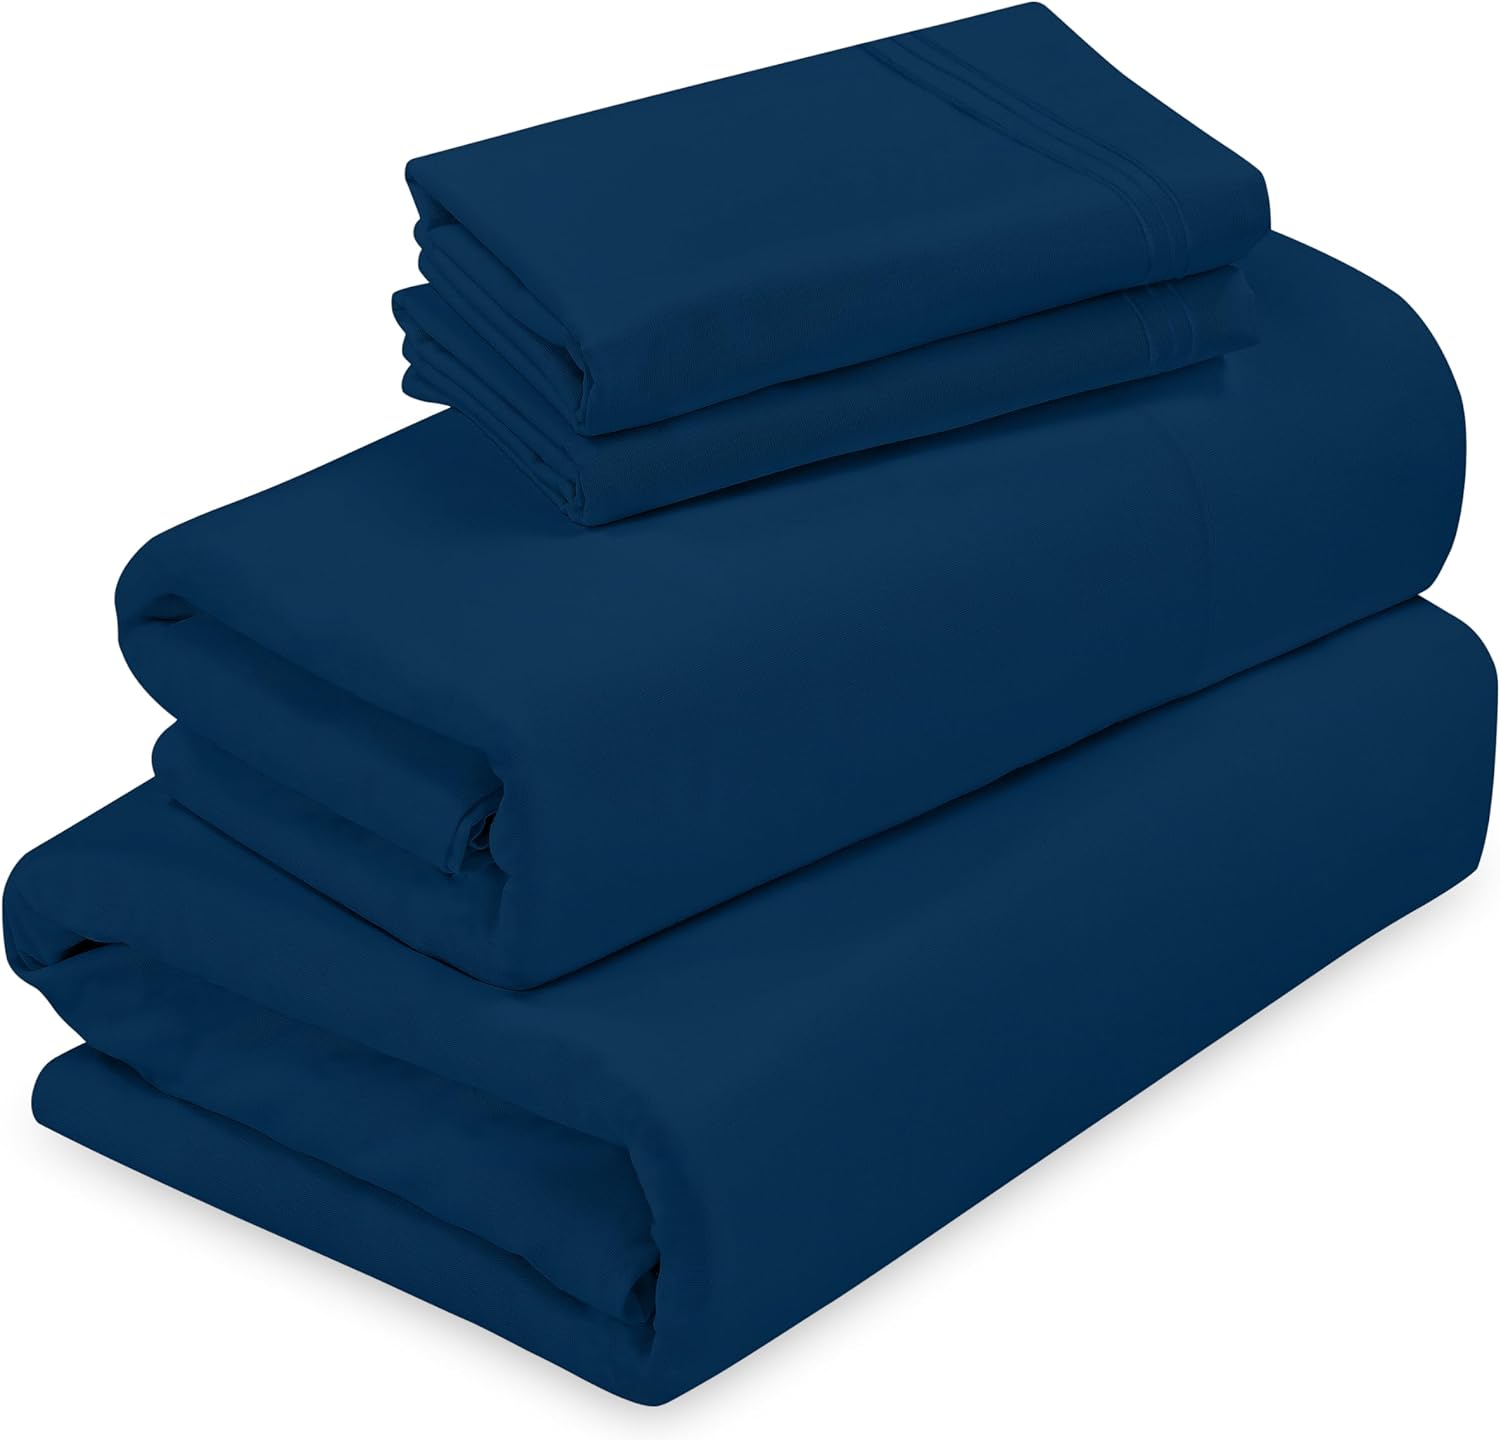 ROYALE LINENS - 4 Piece Queen Bed Sheet - Soft Brushed Microfiber 1800 Bedding Set - 1 Fitted Sheet, 1 Flat Sheet, 2 Pillow Cases - Wrinkle & Fade Resistant Luxury Queen Size Sheet Set (Queen, Navy)